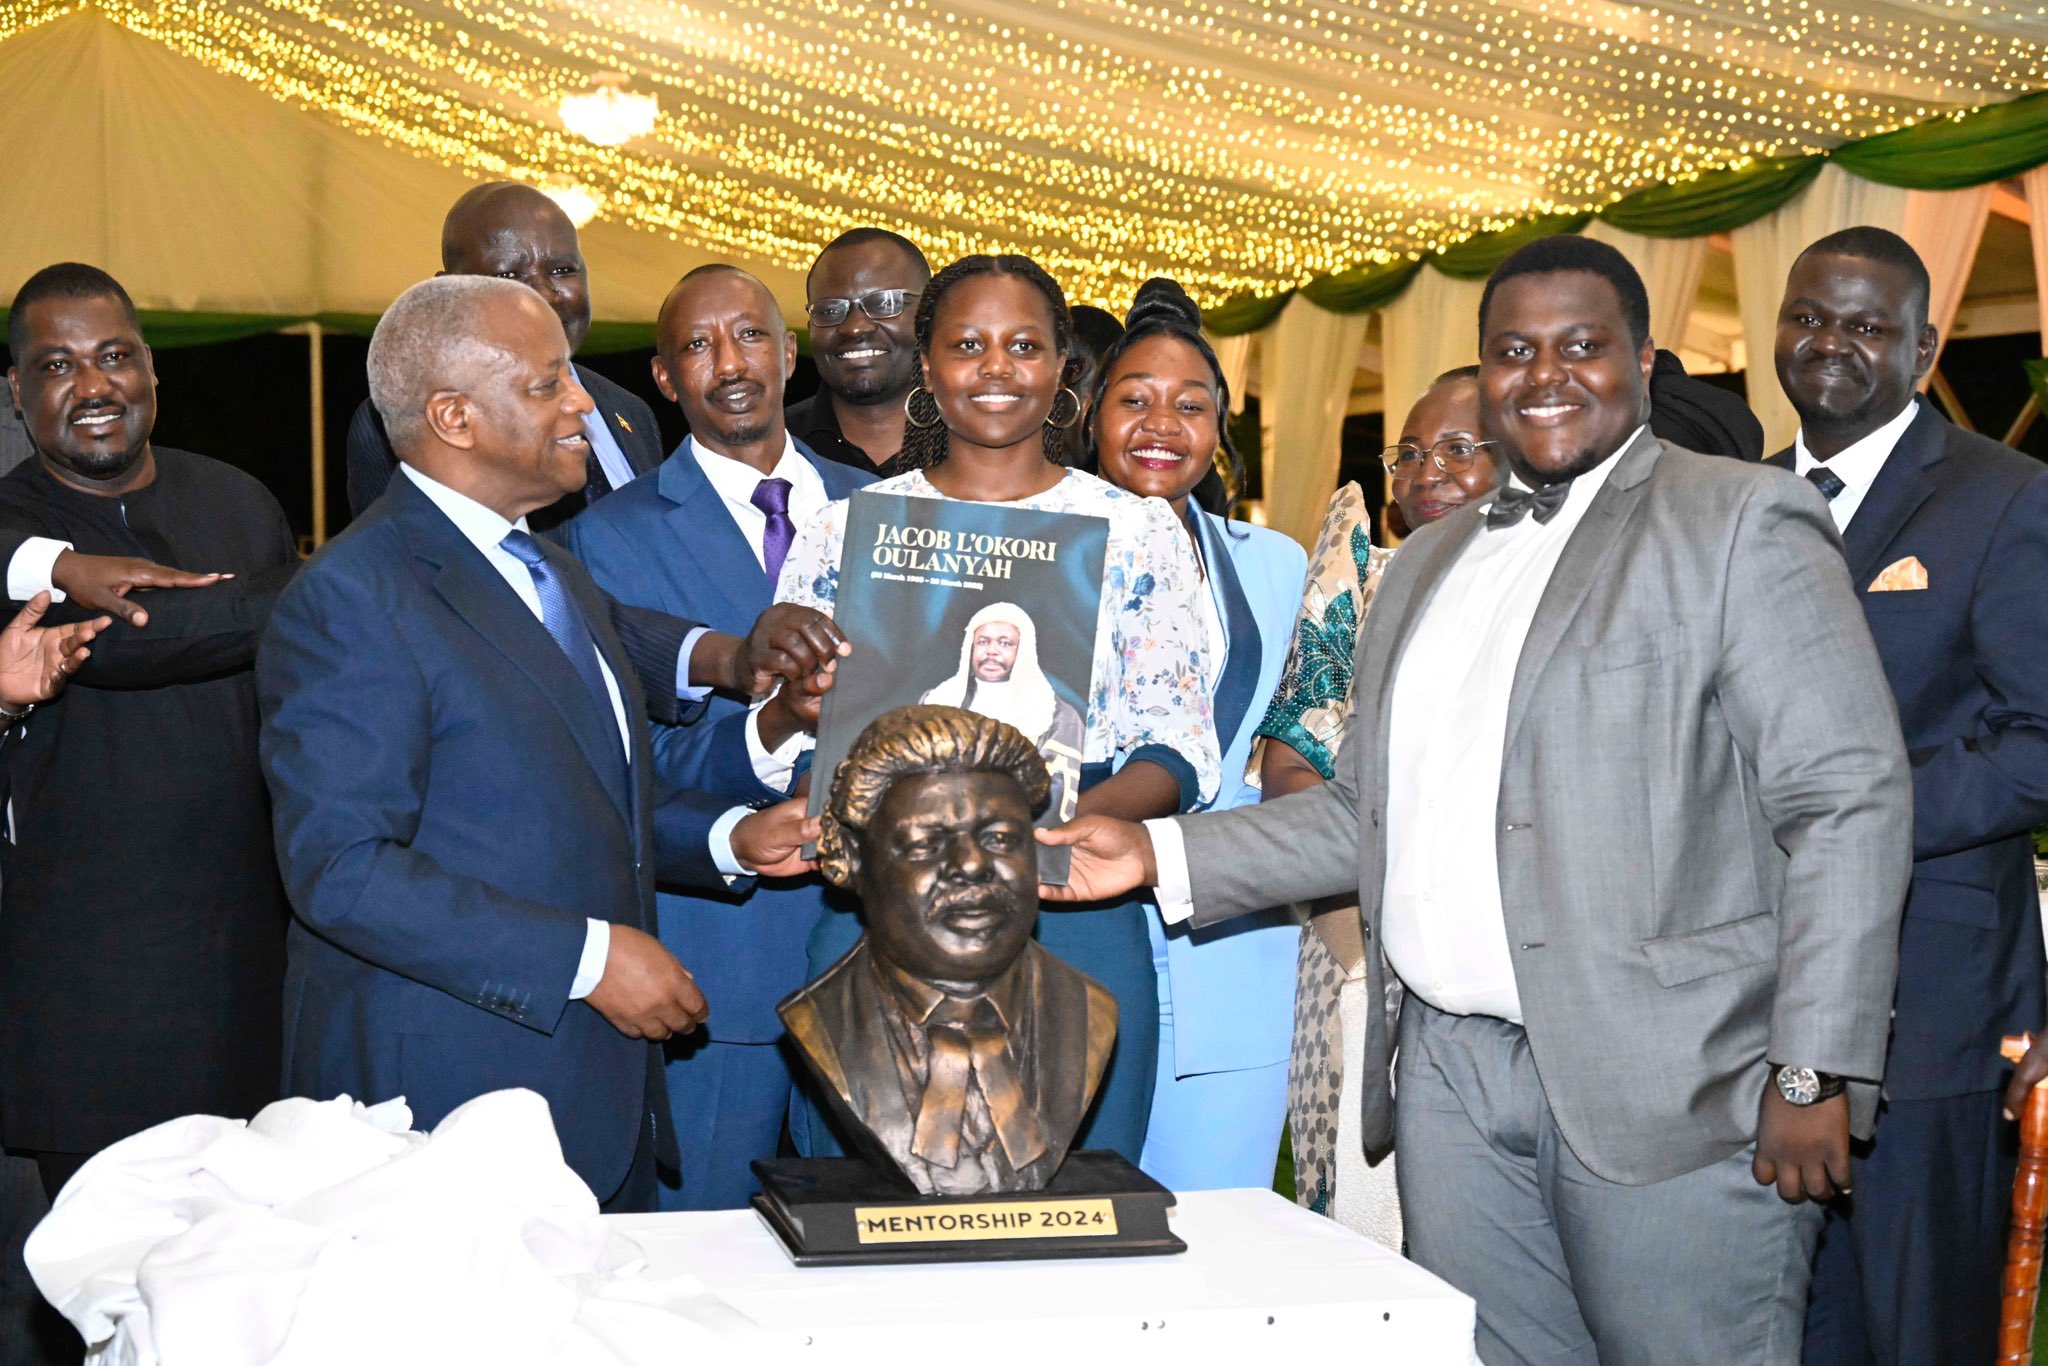 President Museveni Honors Leaders at Entebbe Luncheon